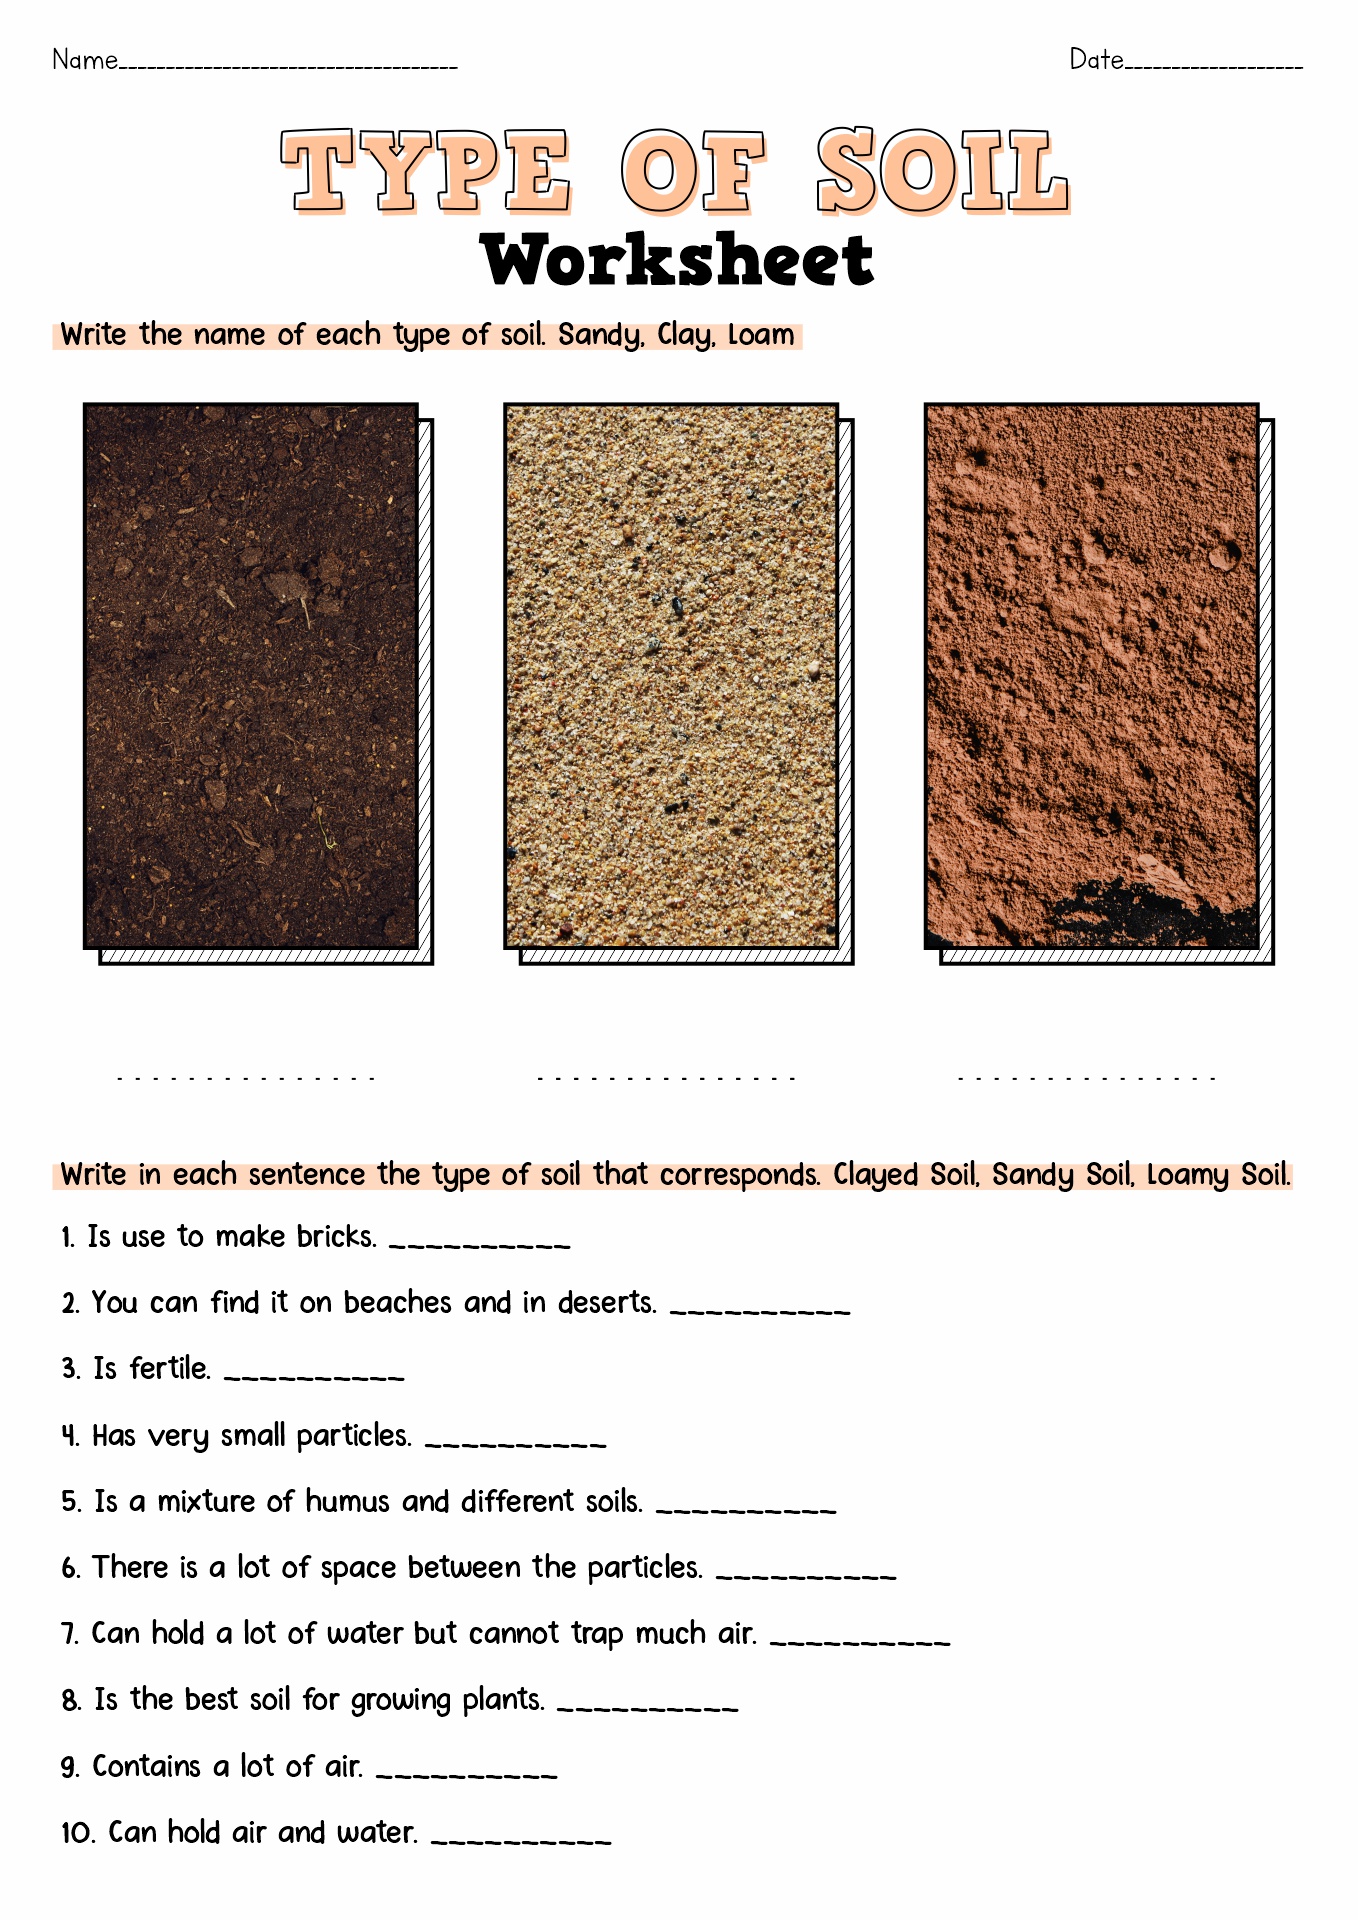 18 Best Images of Soil Worksheets For 3rd Grade Soil Layers